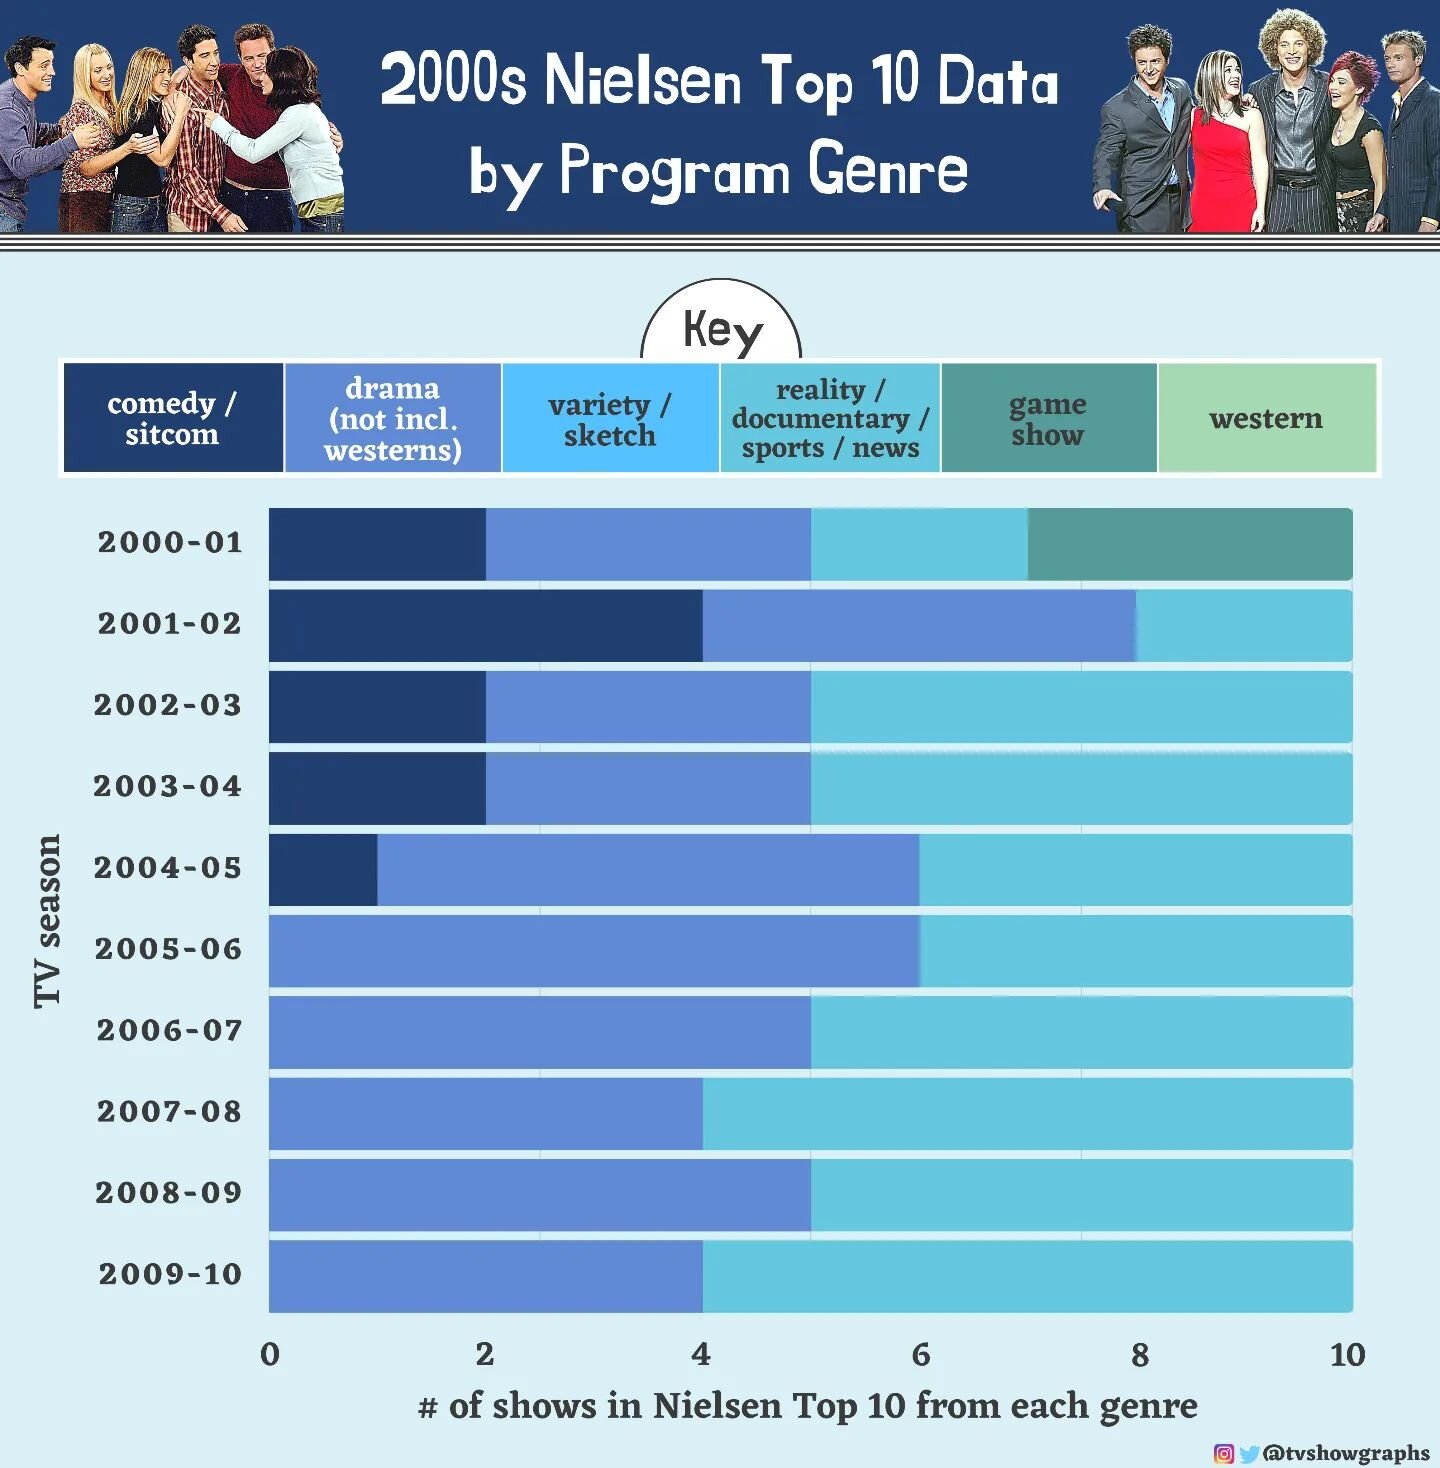 I'm finally getting back to my Nielsen Top 10 genre graphs, by decade... and it's time for the 00s! The comedy drop-off in this decade is staggering (especially compared to the comedy / sitcom domination of the 90s!), and there was a huge rise in bot